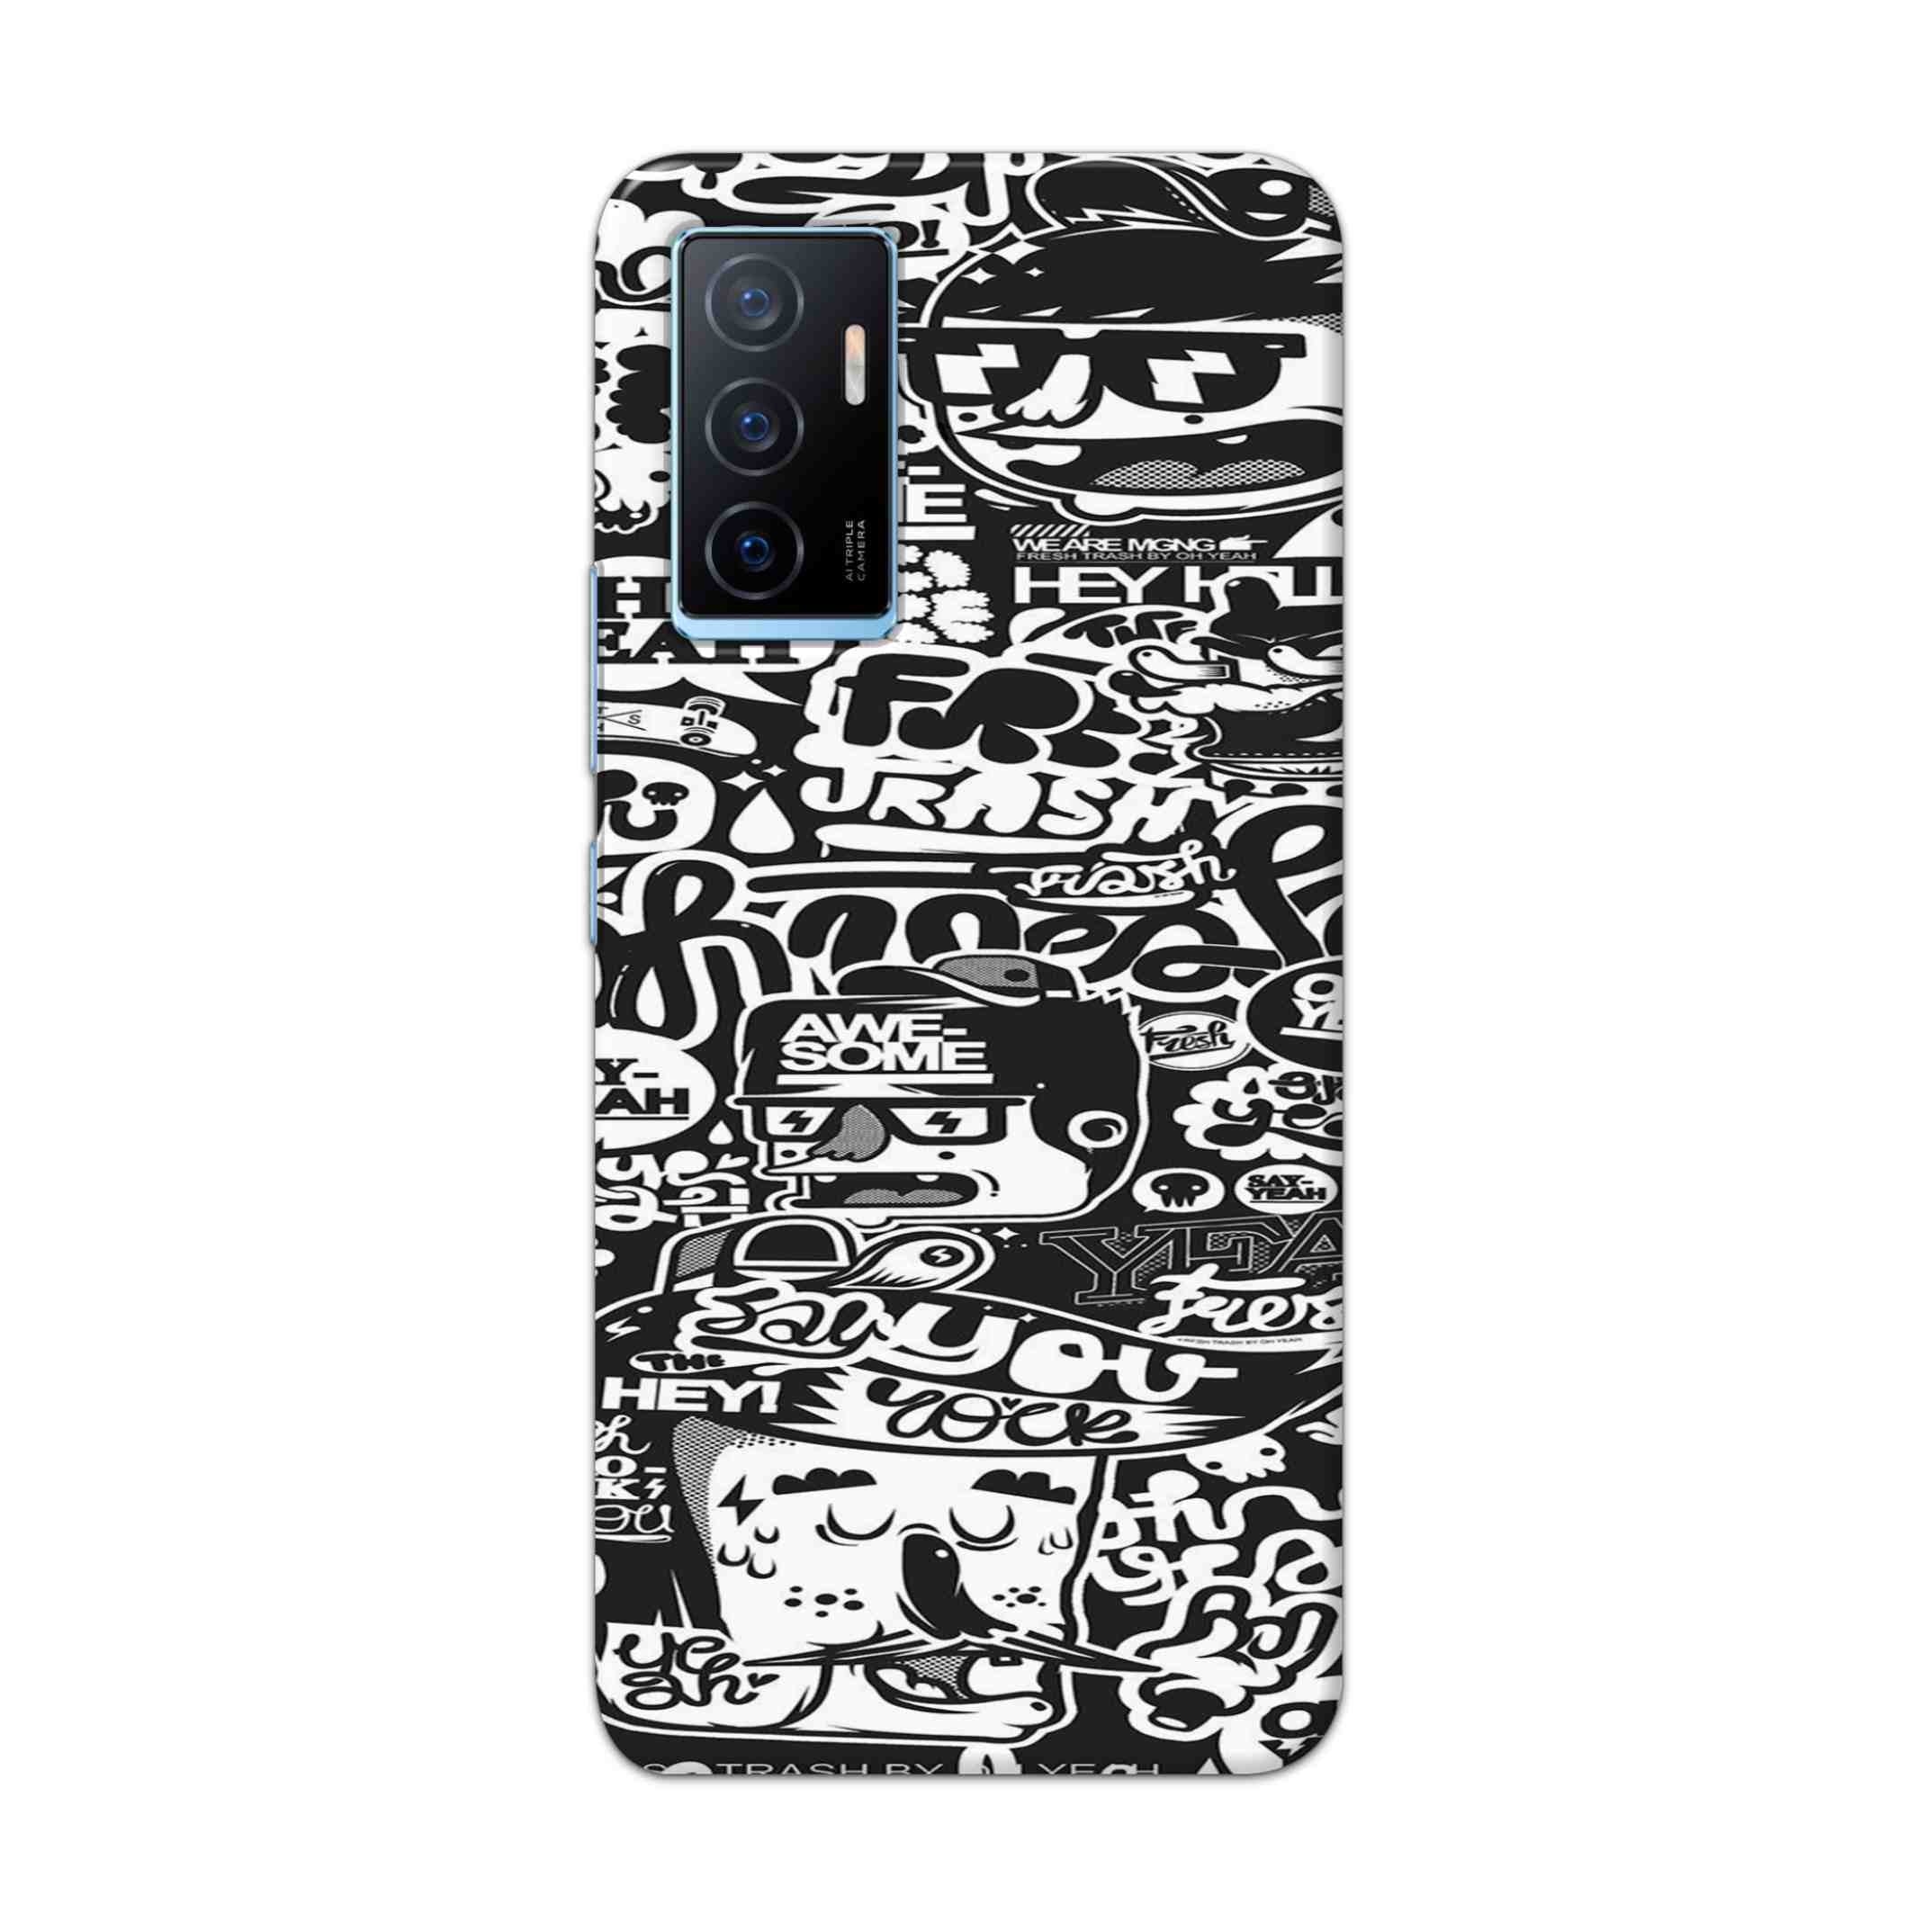 Buy Awesome Hard Back Mobile Phone Case Cover For Vivo Y75 4G Online